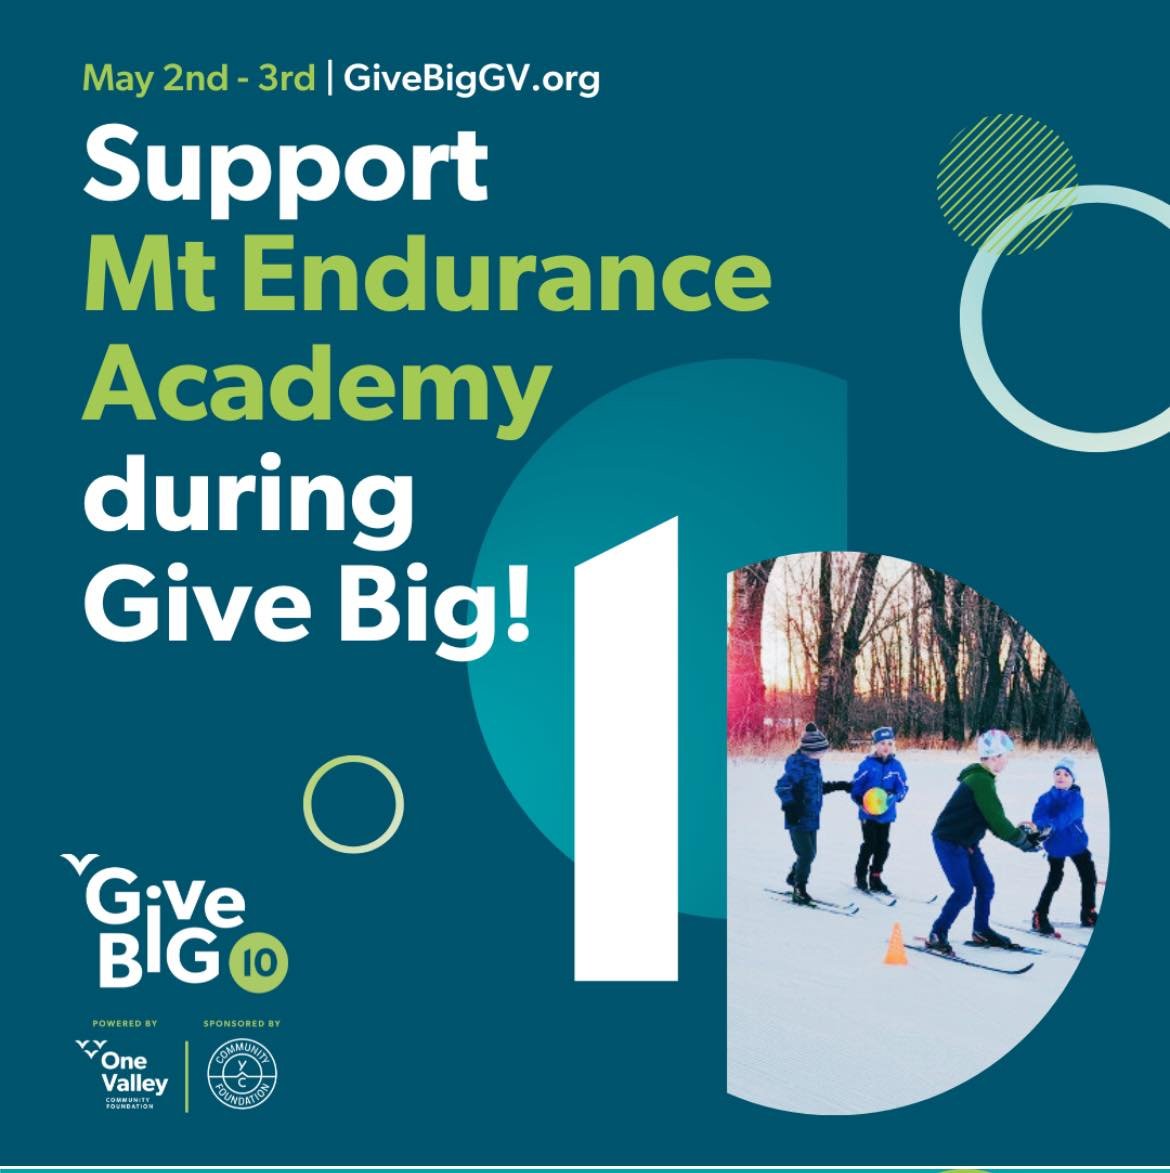 It&rsquo;s happening next week! We hope you&rsquo;ll get in on the fun and support your favorite non-profits (like us). Give Big is a 24 hr community fundraising event featuring over 200 non-profits in Gallatin Valley, including Montana Endurance Aca